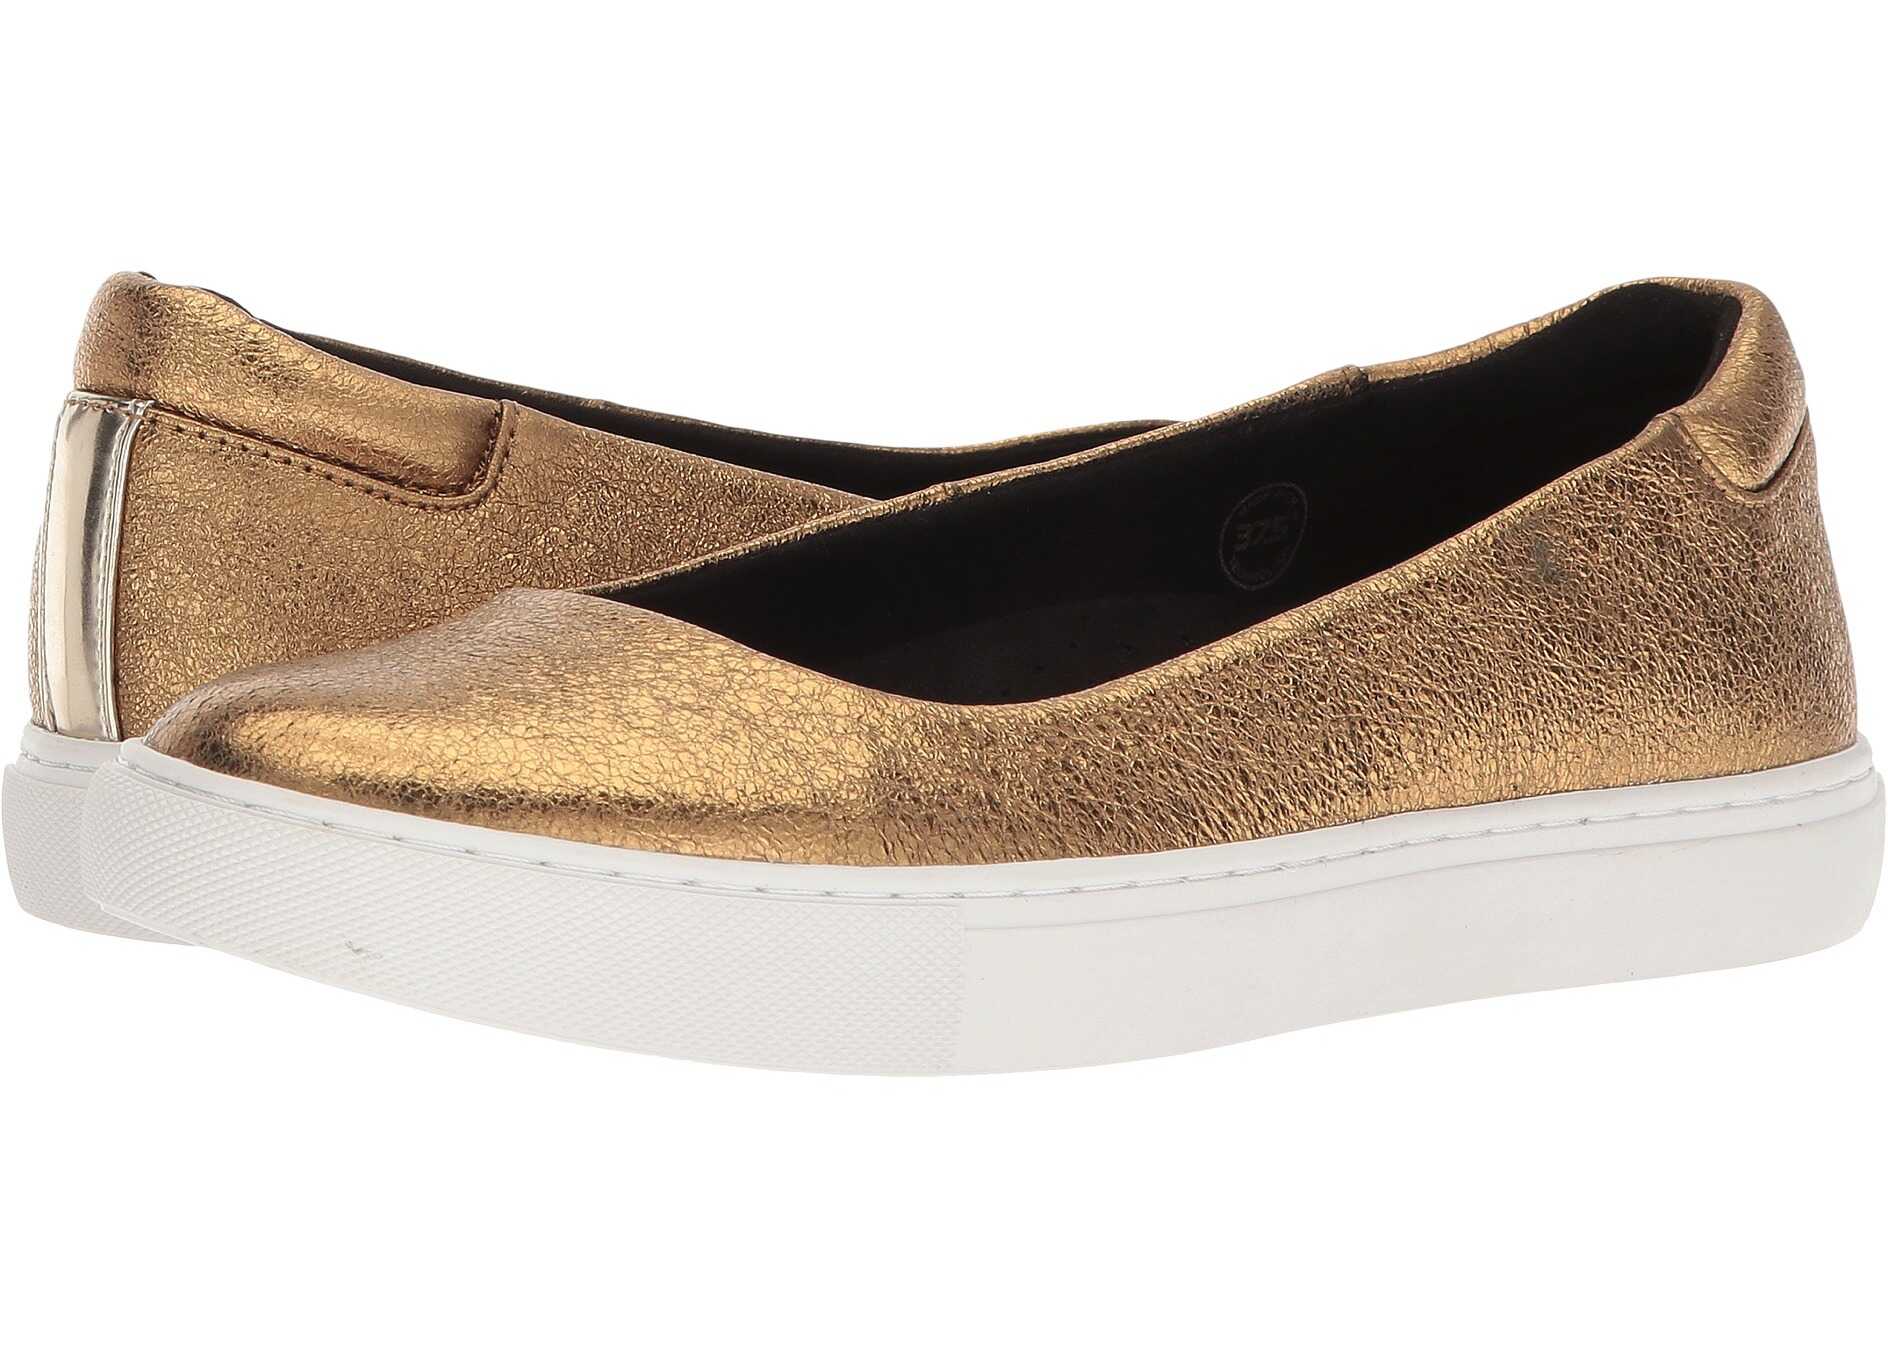 Kenneth Cole New York Kassie Gold Metallic Leather